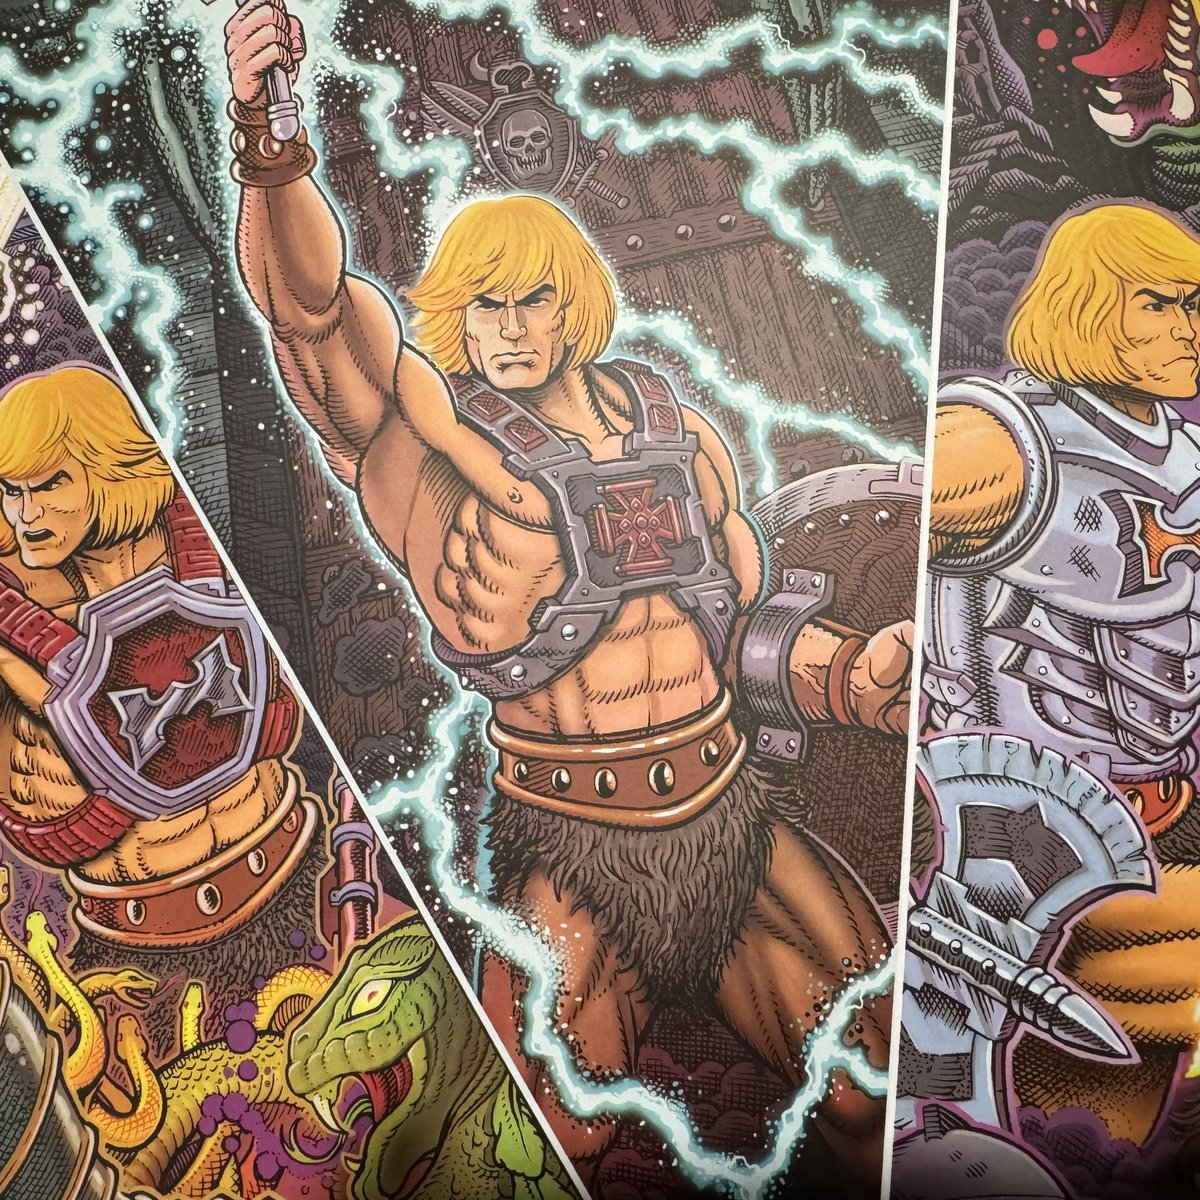 Mondo Timed Edition He-Man has arrived!  Now to choose an armor…

#mondo #motu #mastersoftheuniverse #heman #sixthscalefigure #sixthscale #fypシ #toys #actionfigure #toycommunity #toyphotography #actionfigures #actionfigurephotography #actionfigurecollector #toystory #toy